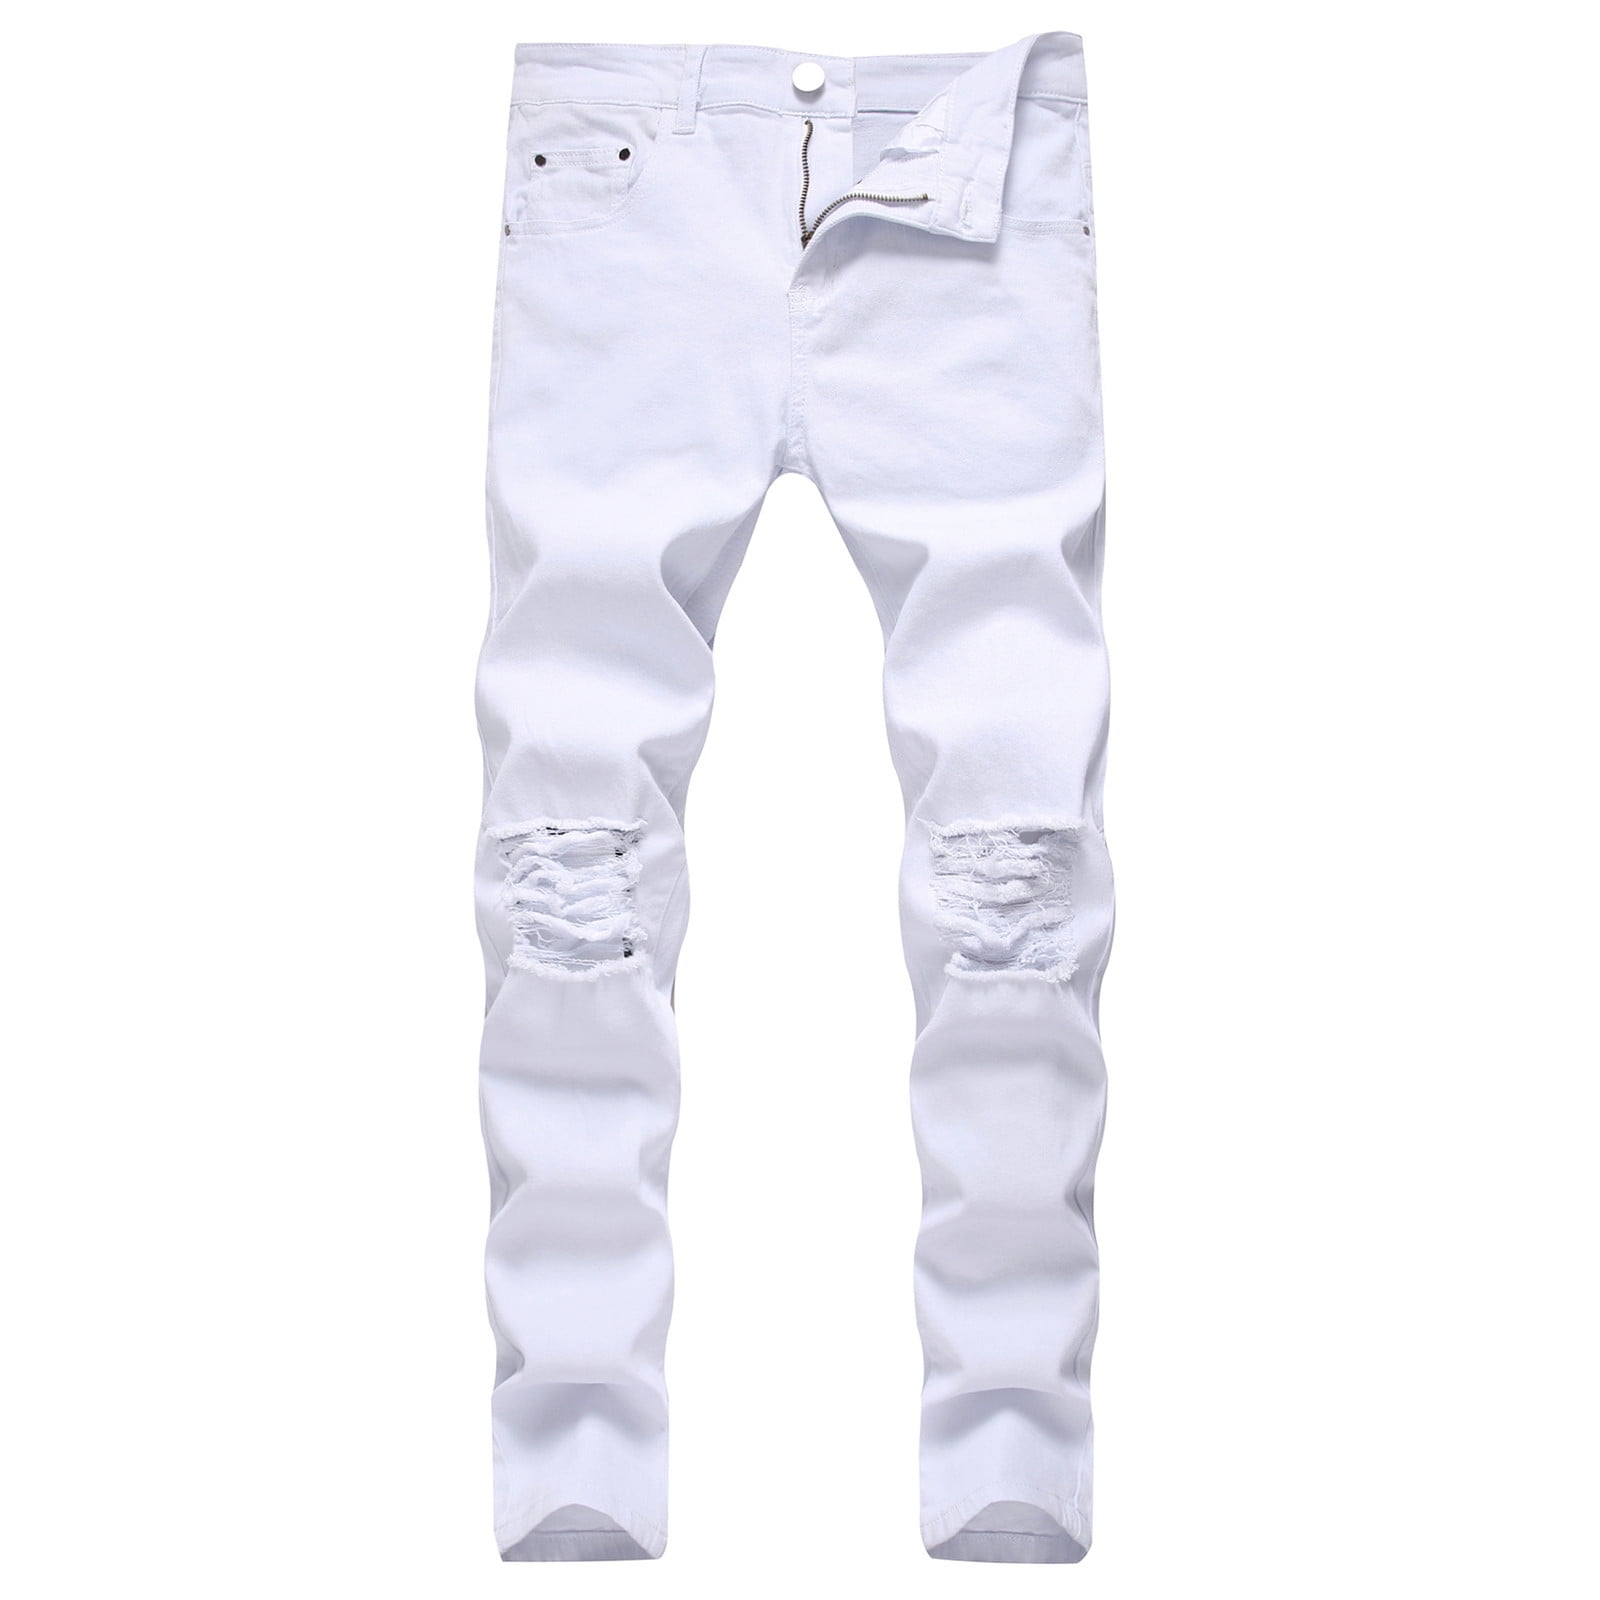 Aoochasliy Mens Jeans Clearance Reduced Price Men's New Tight-fitting ...